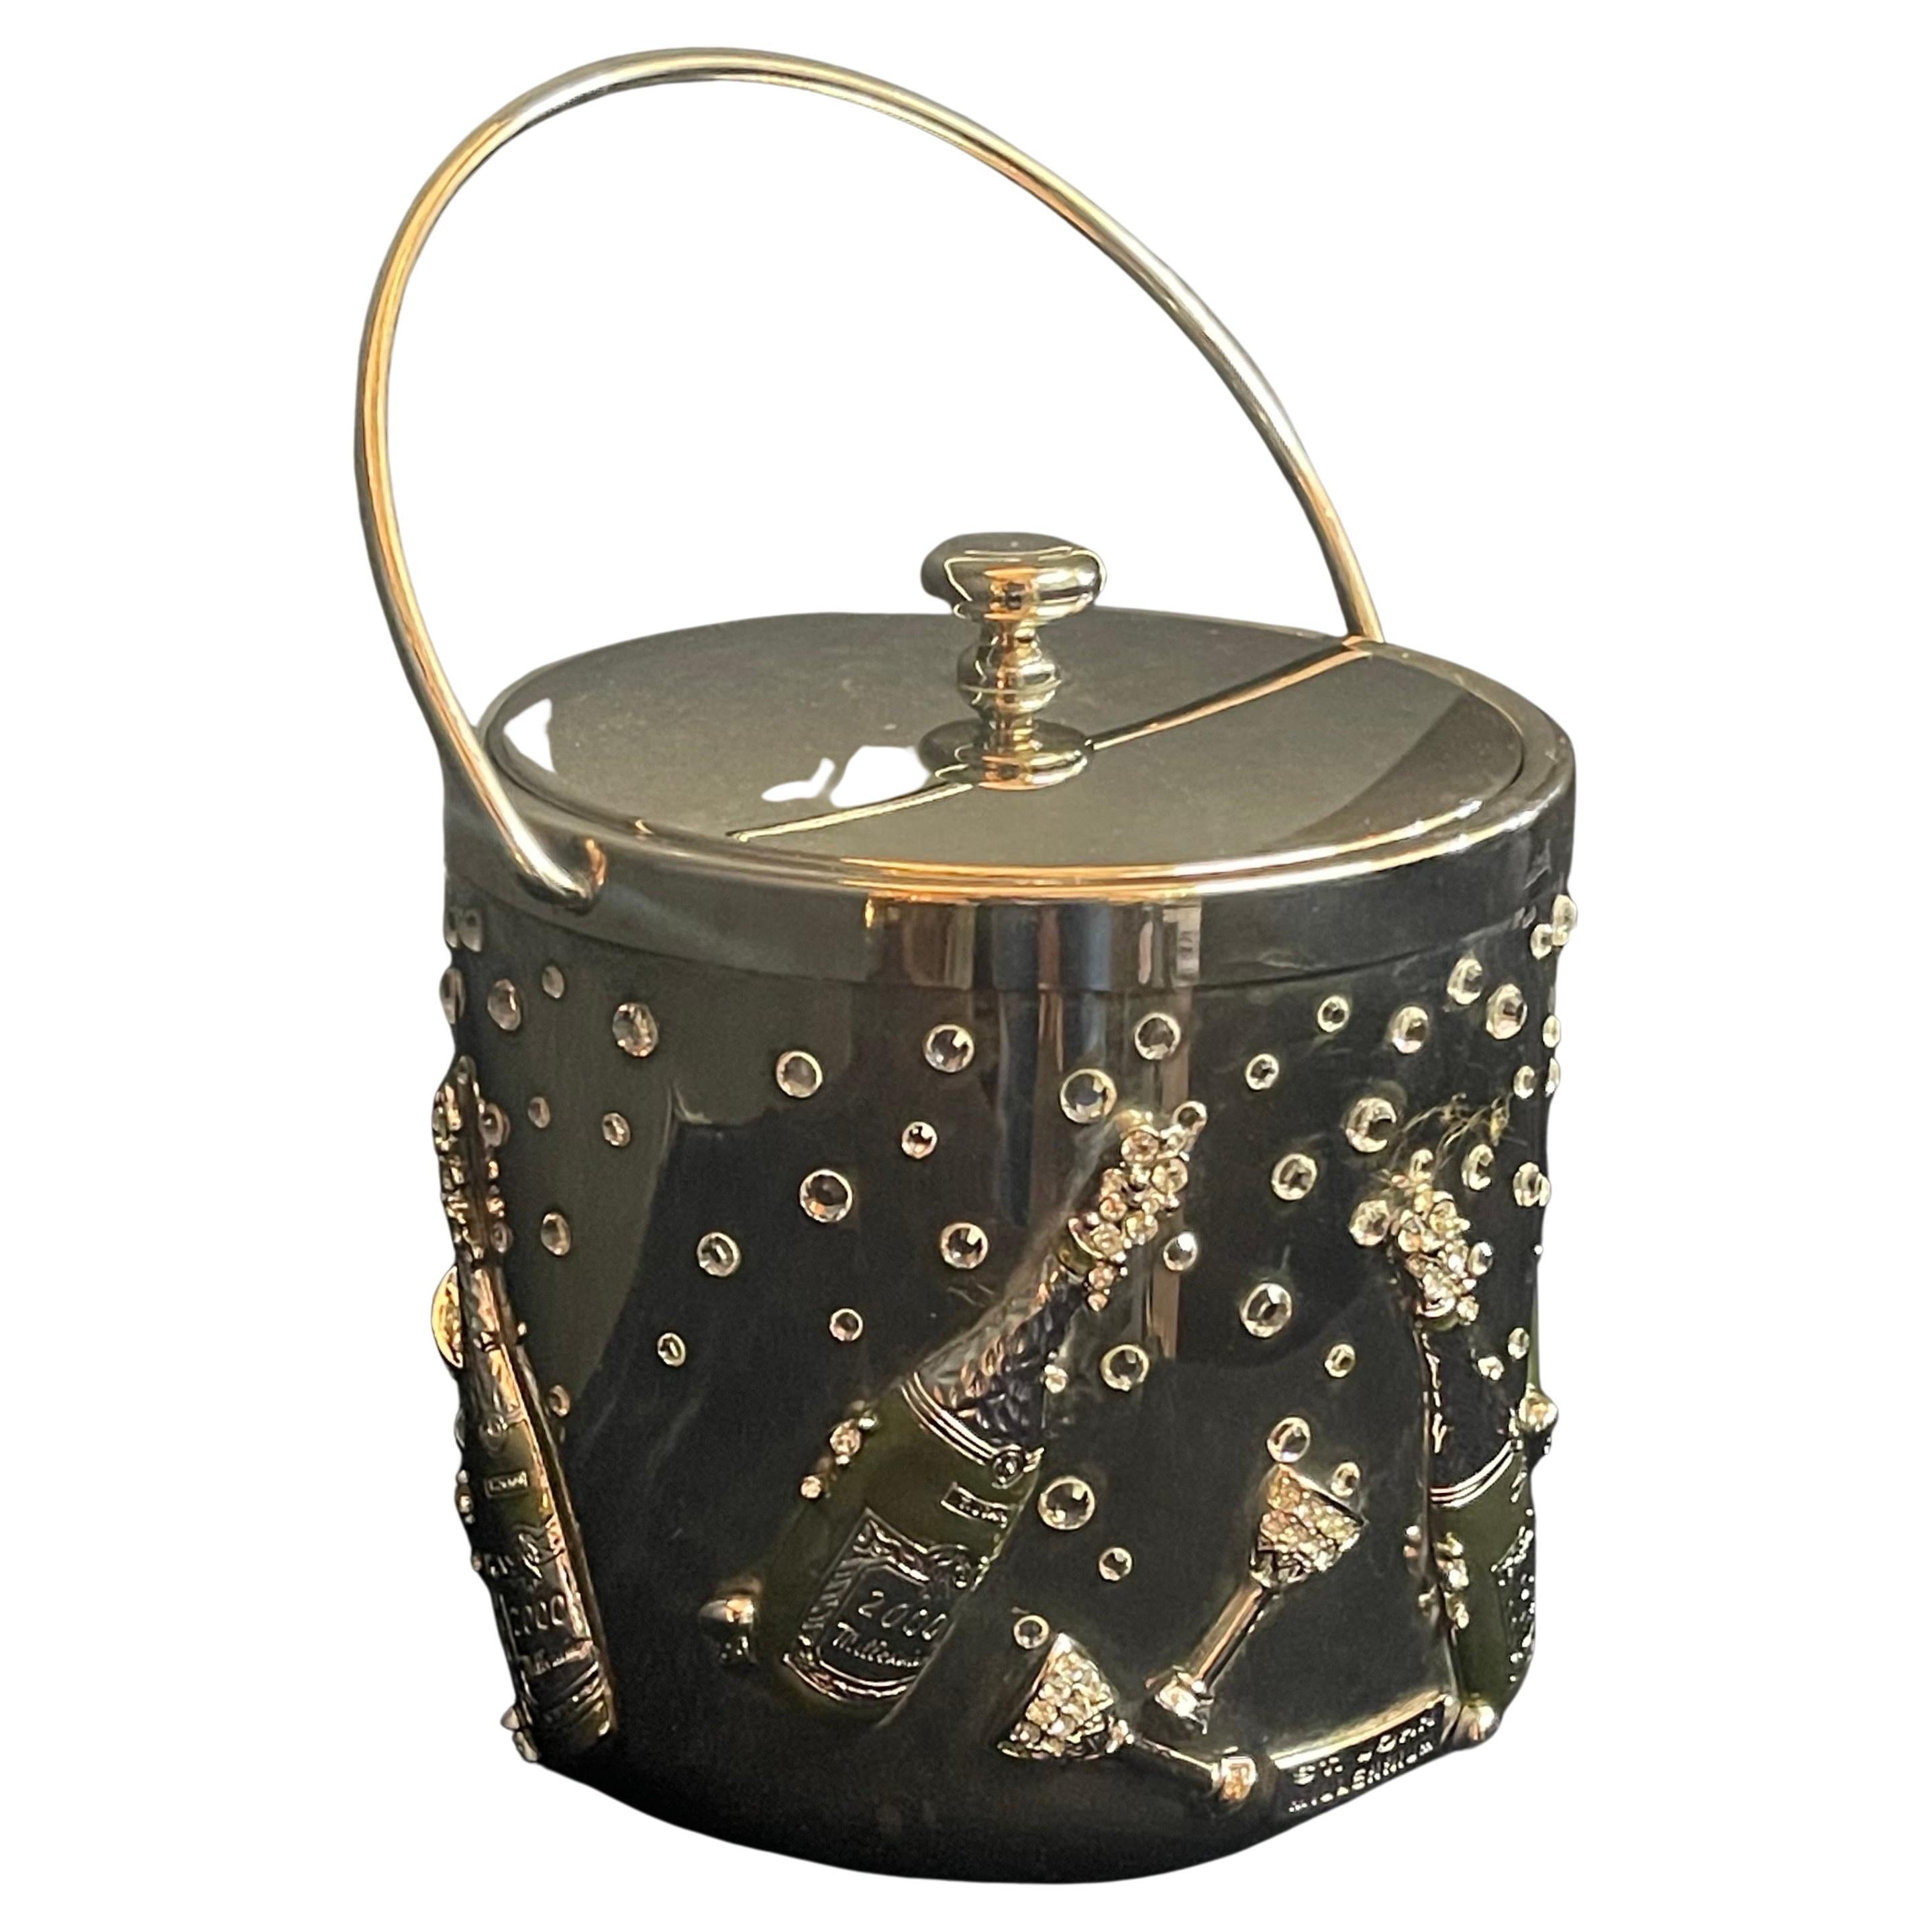 A rare and wonderful St. John home millennium swarovski encrusted crystal in the design of champagne bottles & glasses with bubbles. This stunning ice bucket / cooler is 10